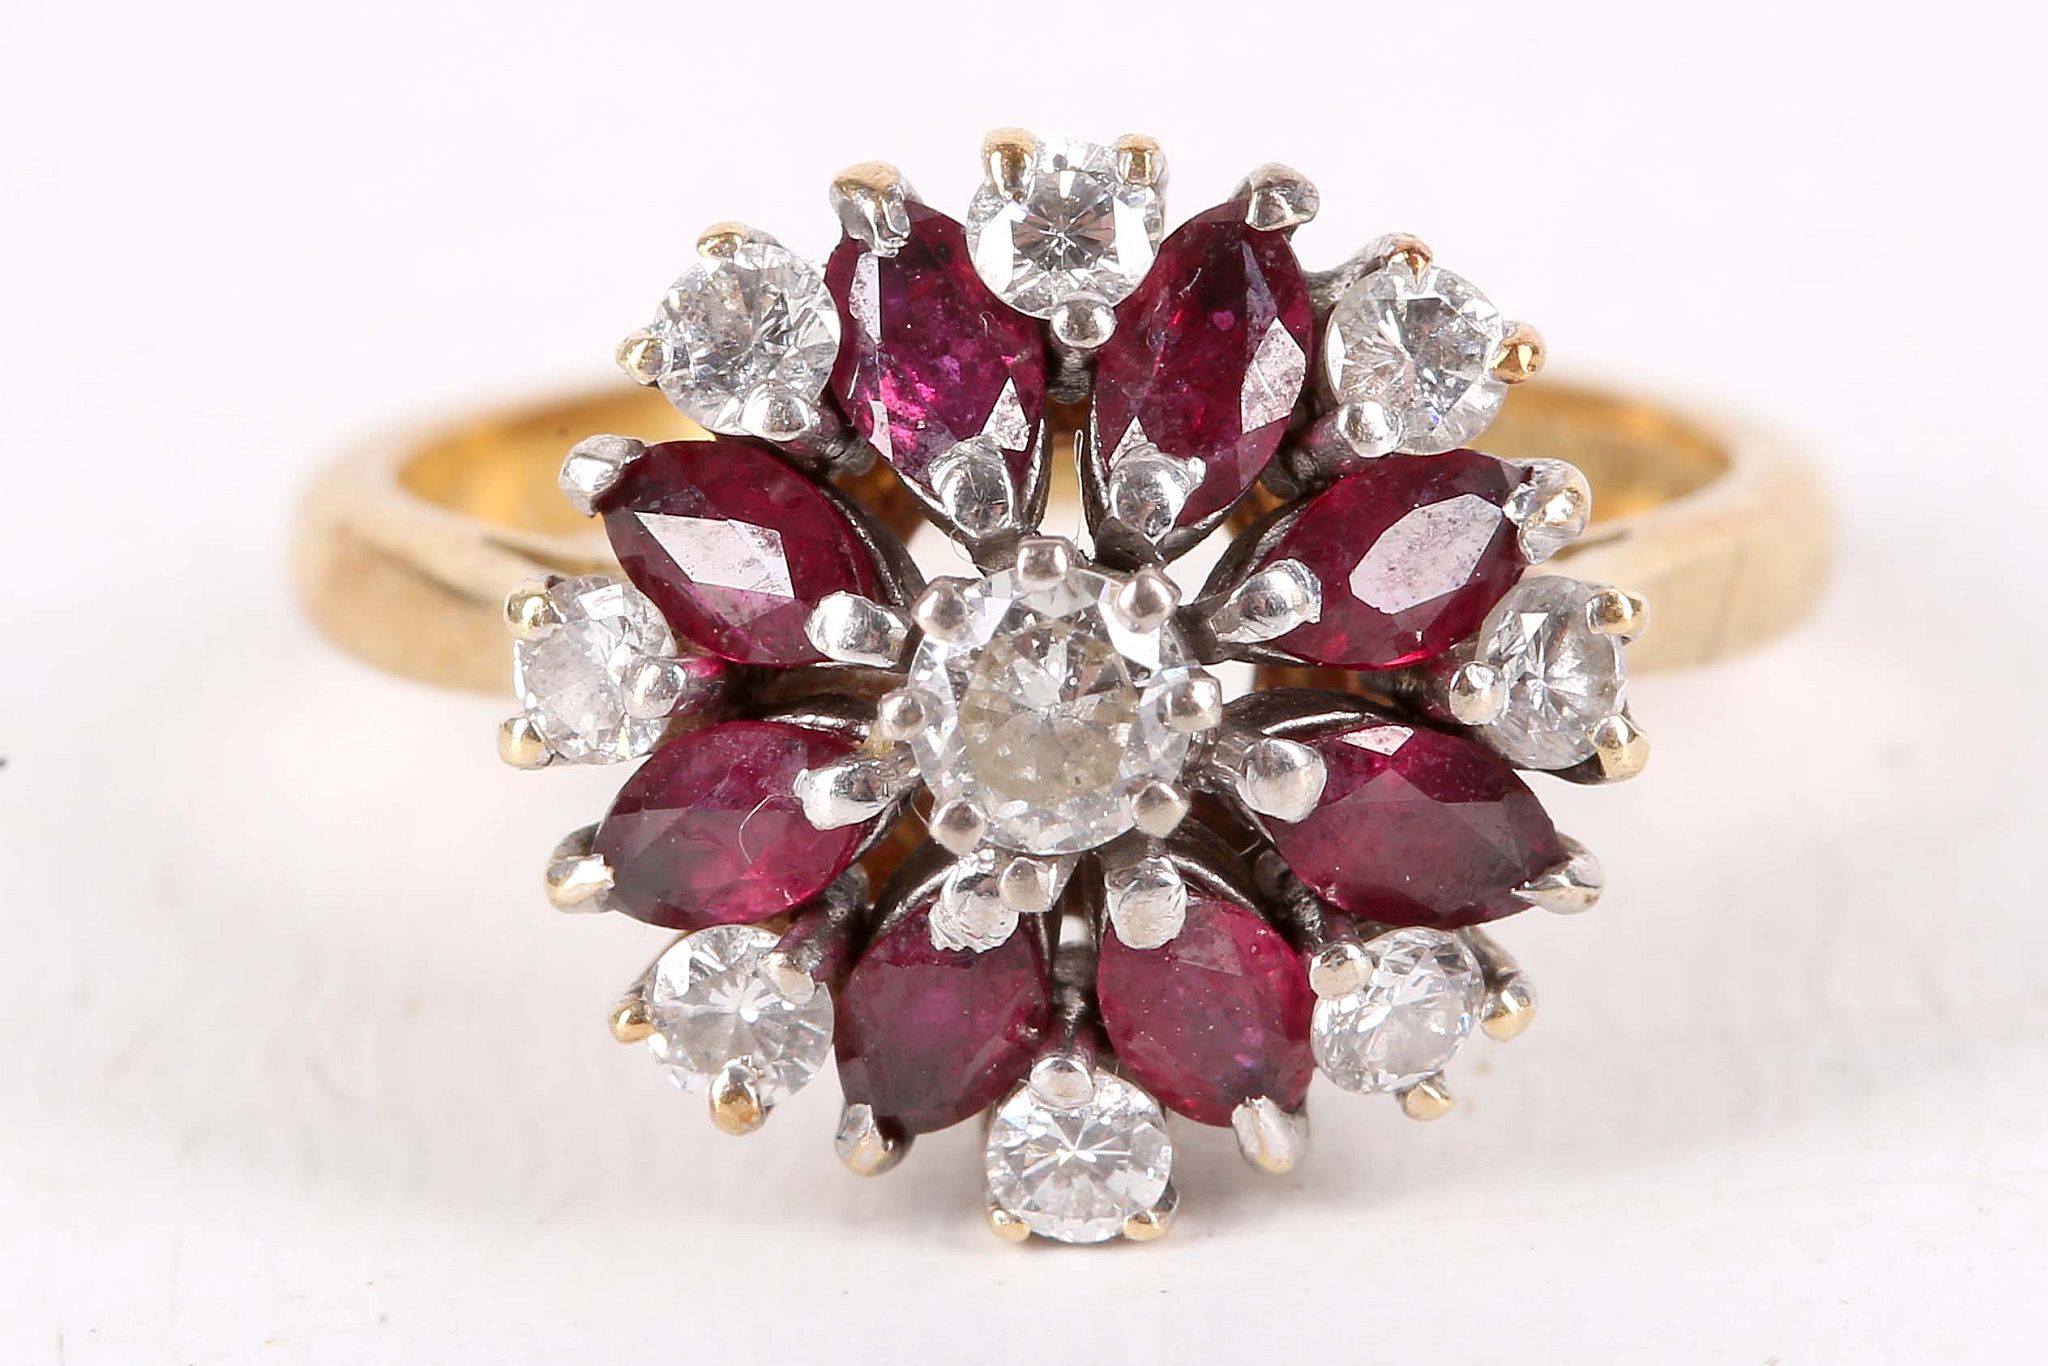 A garnet and diamond cluster ring, Set with circular-cut garnets and brilliant-cut diamonds, mounted